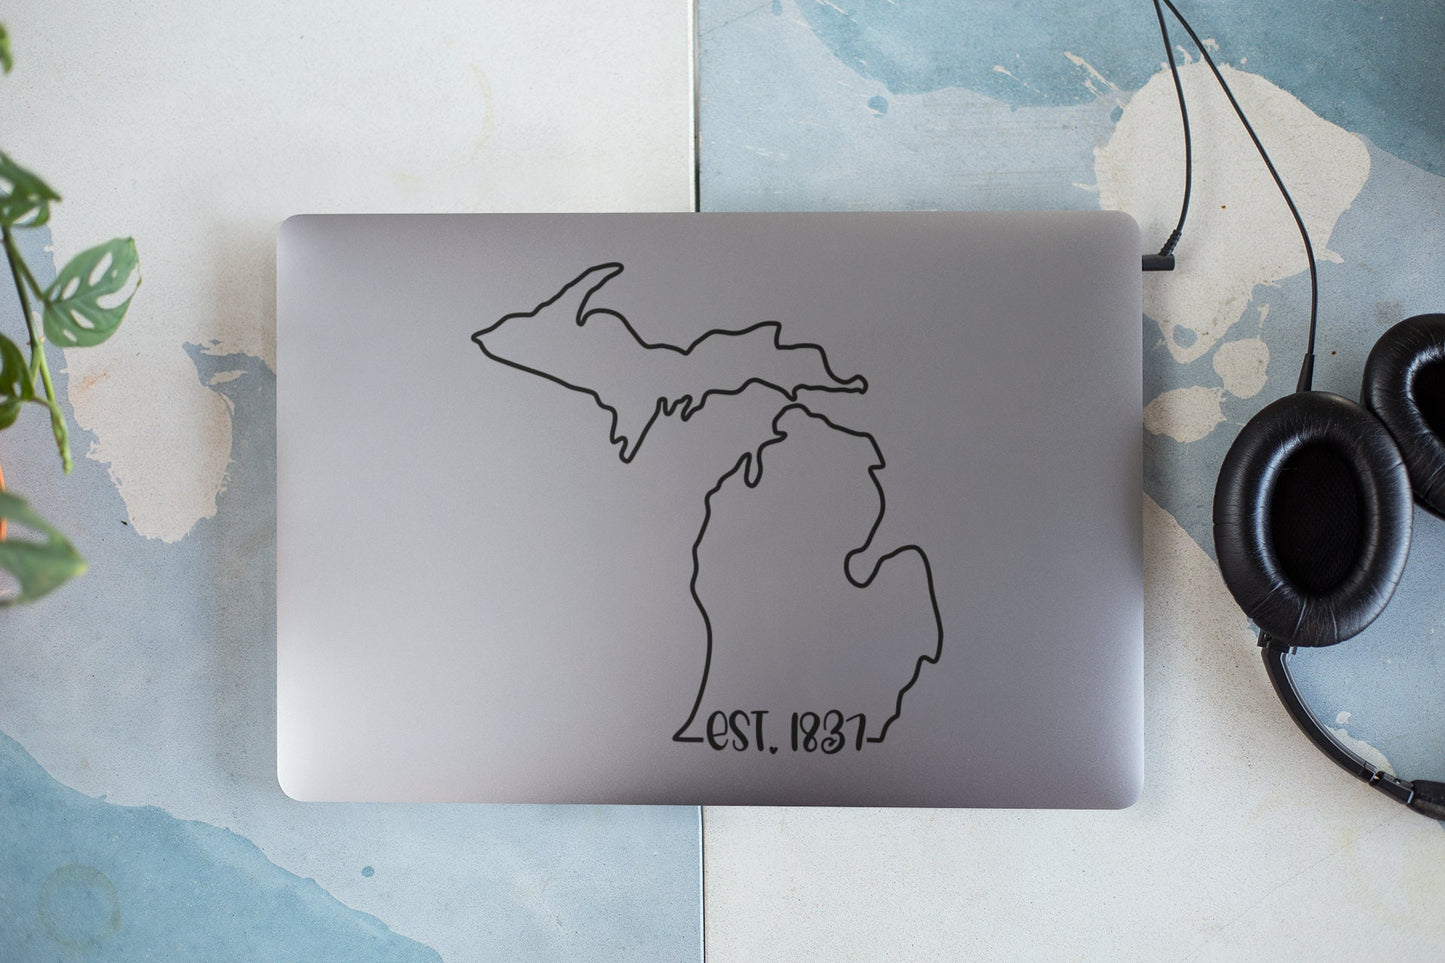 Michigan EST. 1837 Decal - Many Colors & Sizes